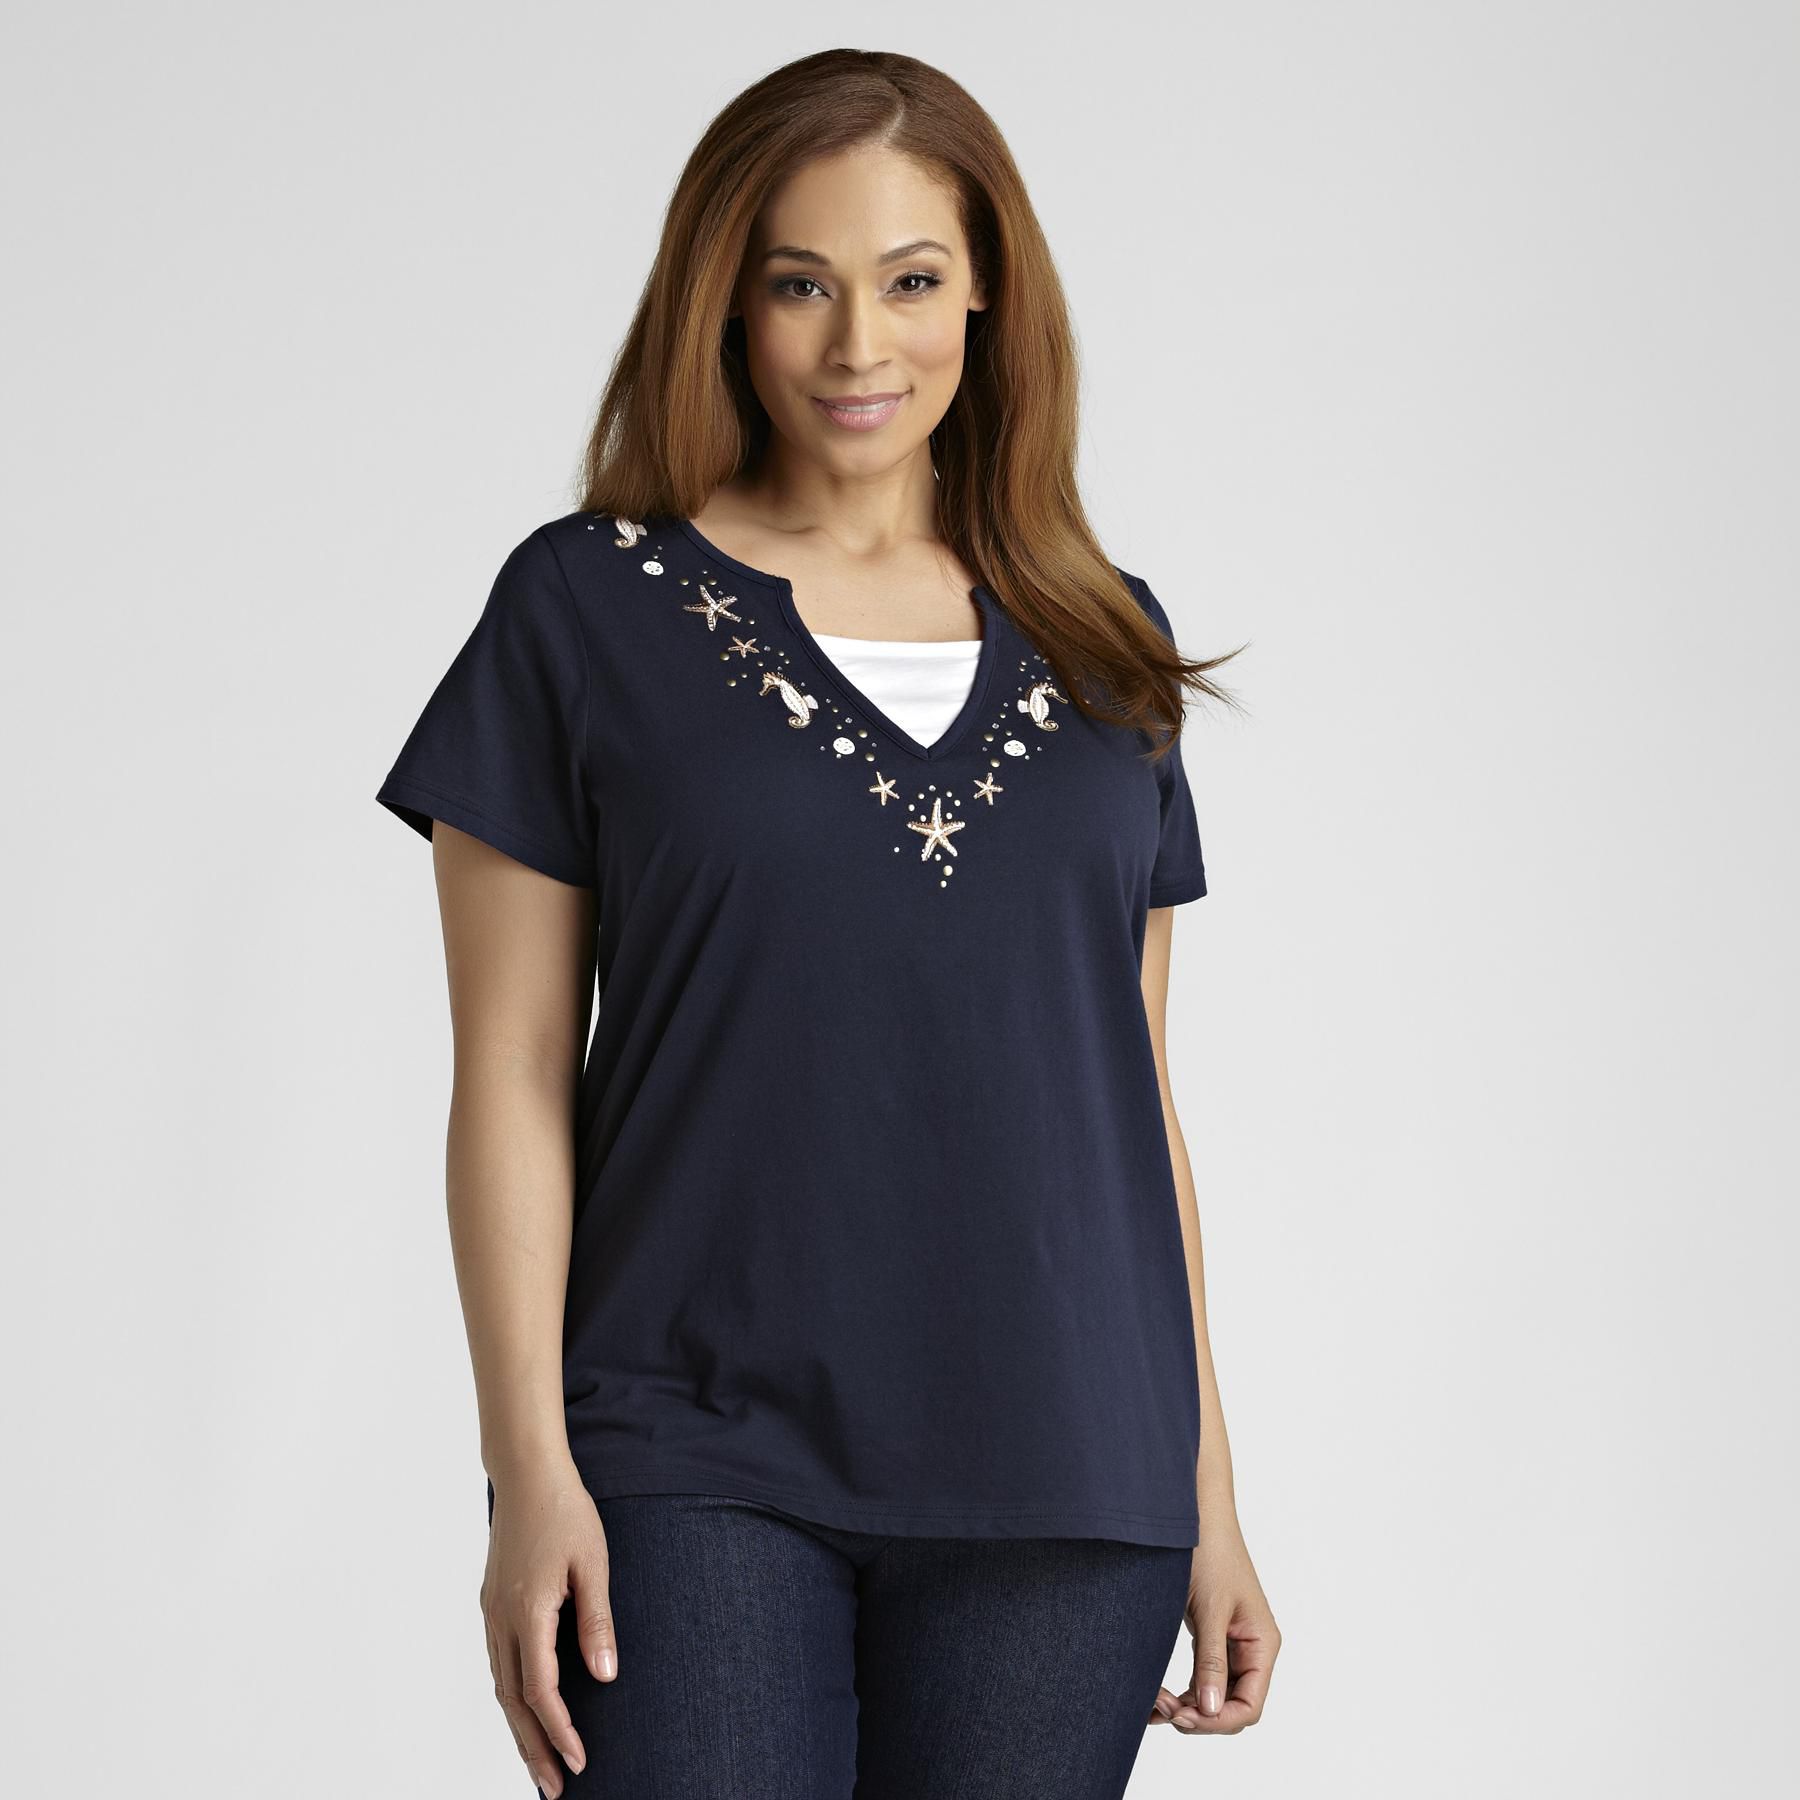 Basic Editions Women's Plus Layered Look T-Shirt